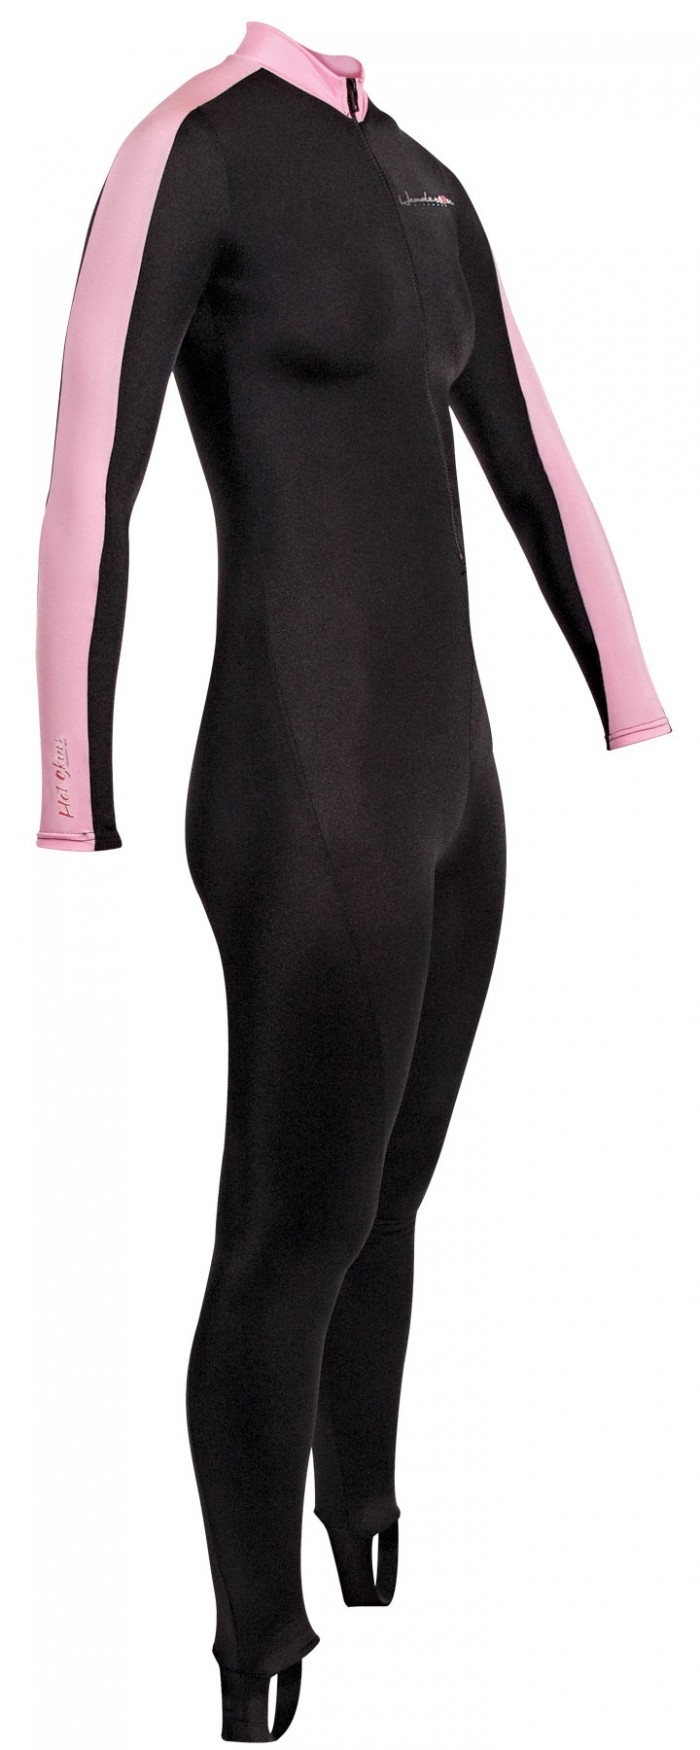 NWOT Henderson USA HOTSKIN Wetsuit SPF protection stirrup foot ch/adult size 